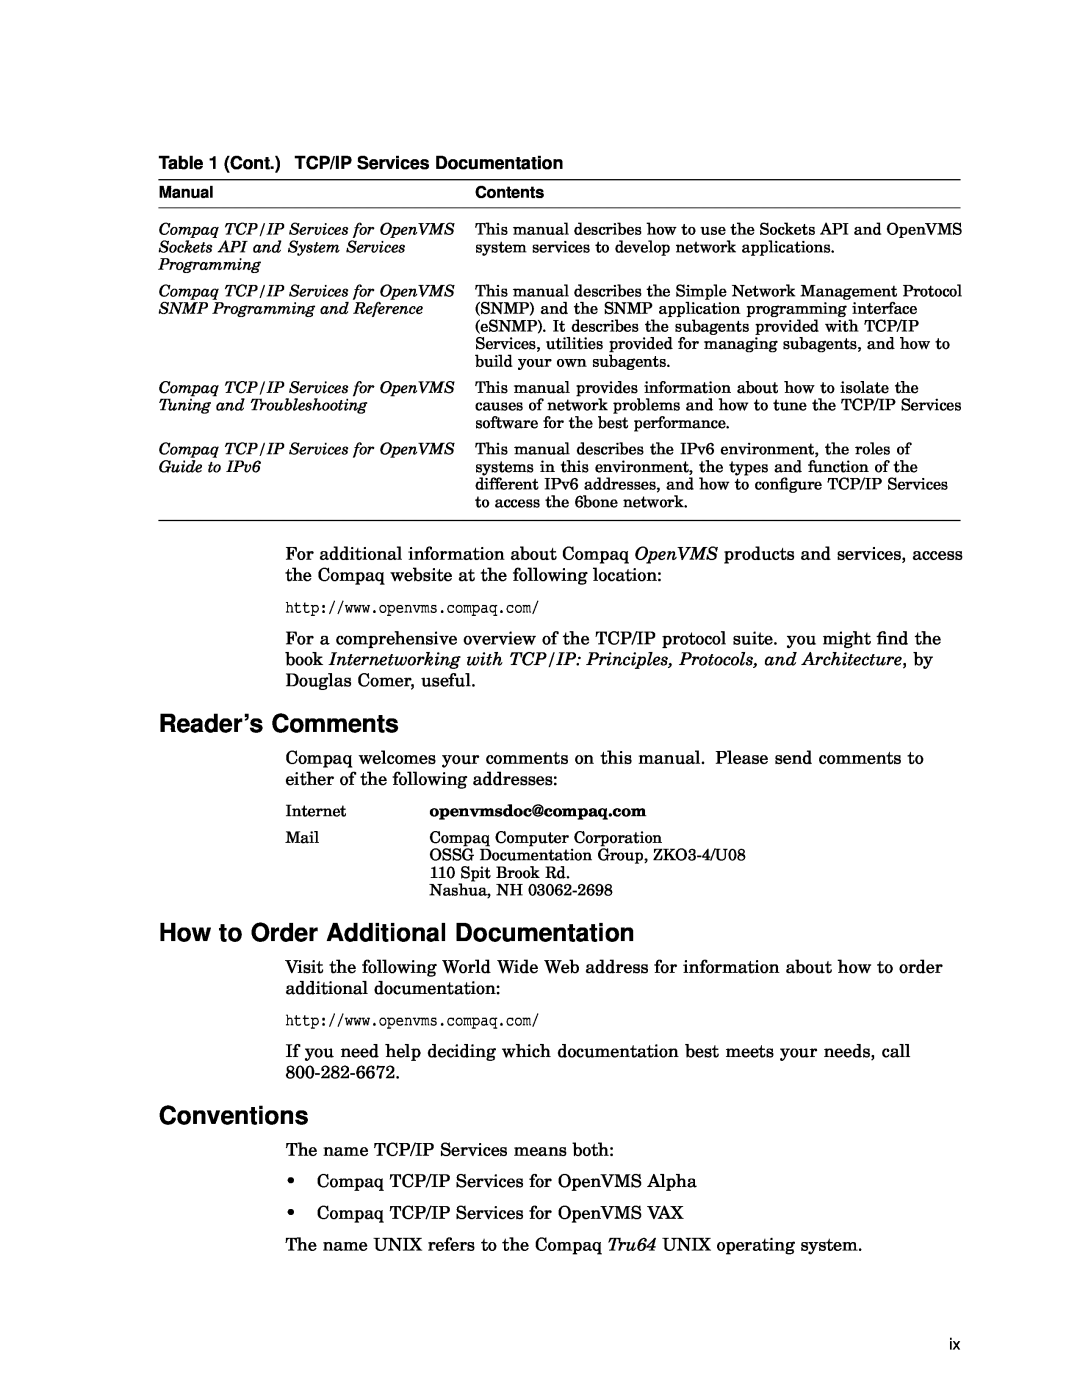 Compaq AAR04BCTE manual Reader’s Comments, How to Order Additional Documentation, Conventions 